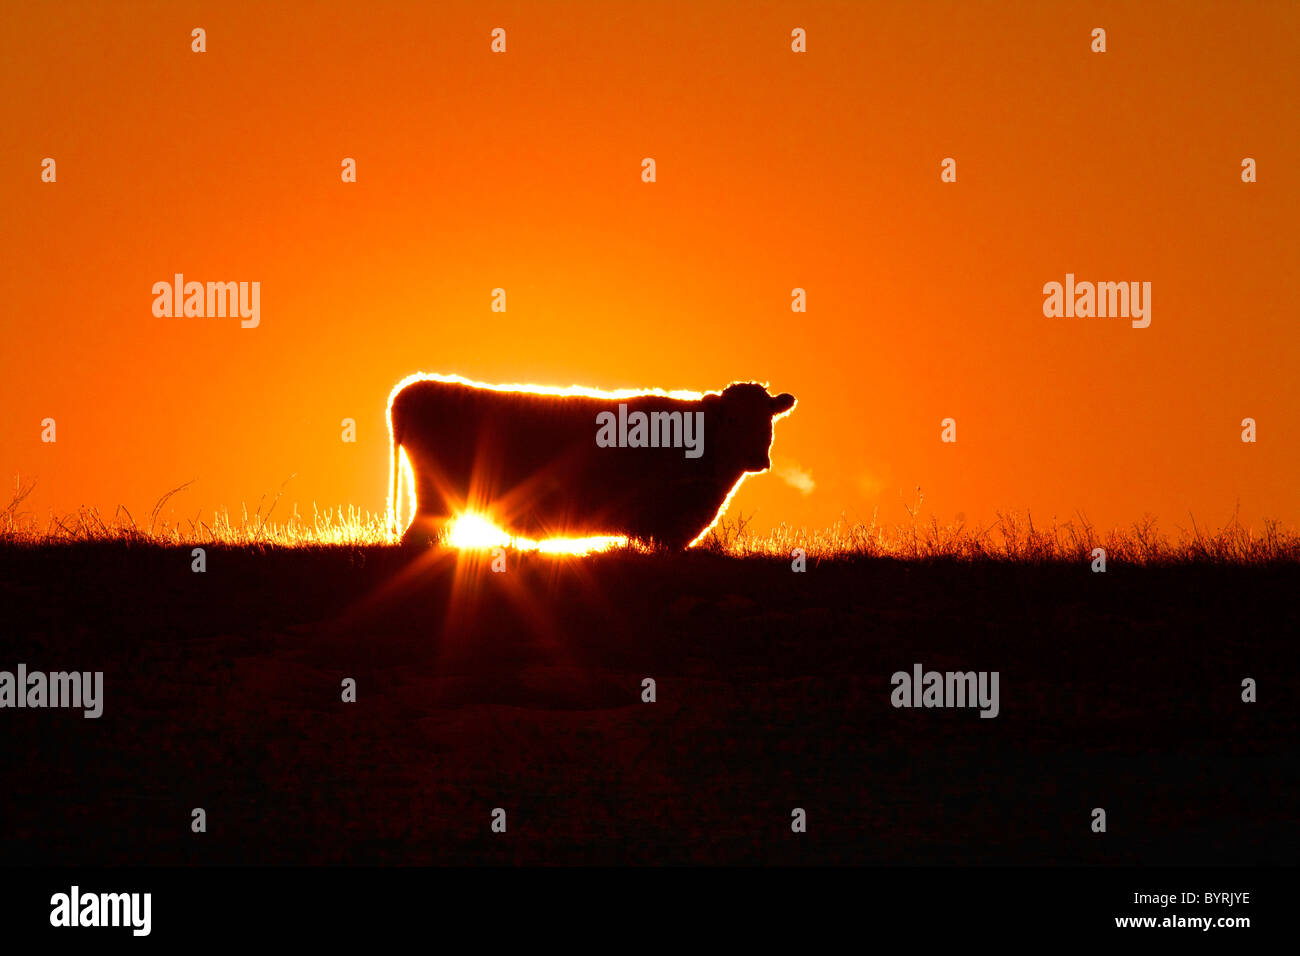 Livestock - Beef cow on a ridgeline silhouetted by the sunset / Alberta, Canada. Stock Photo